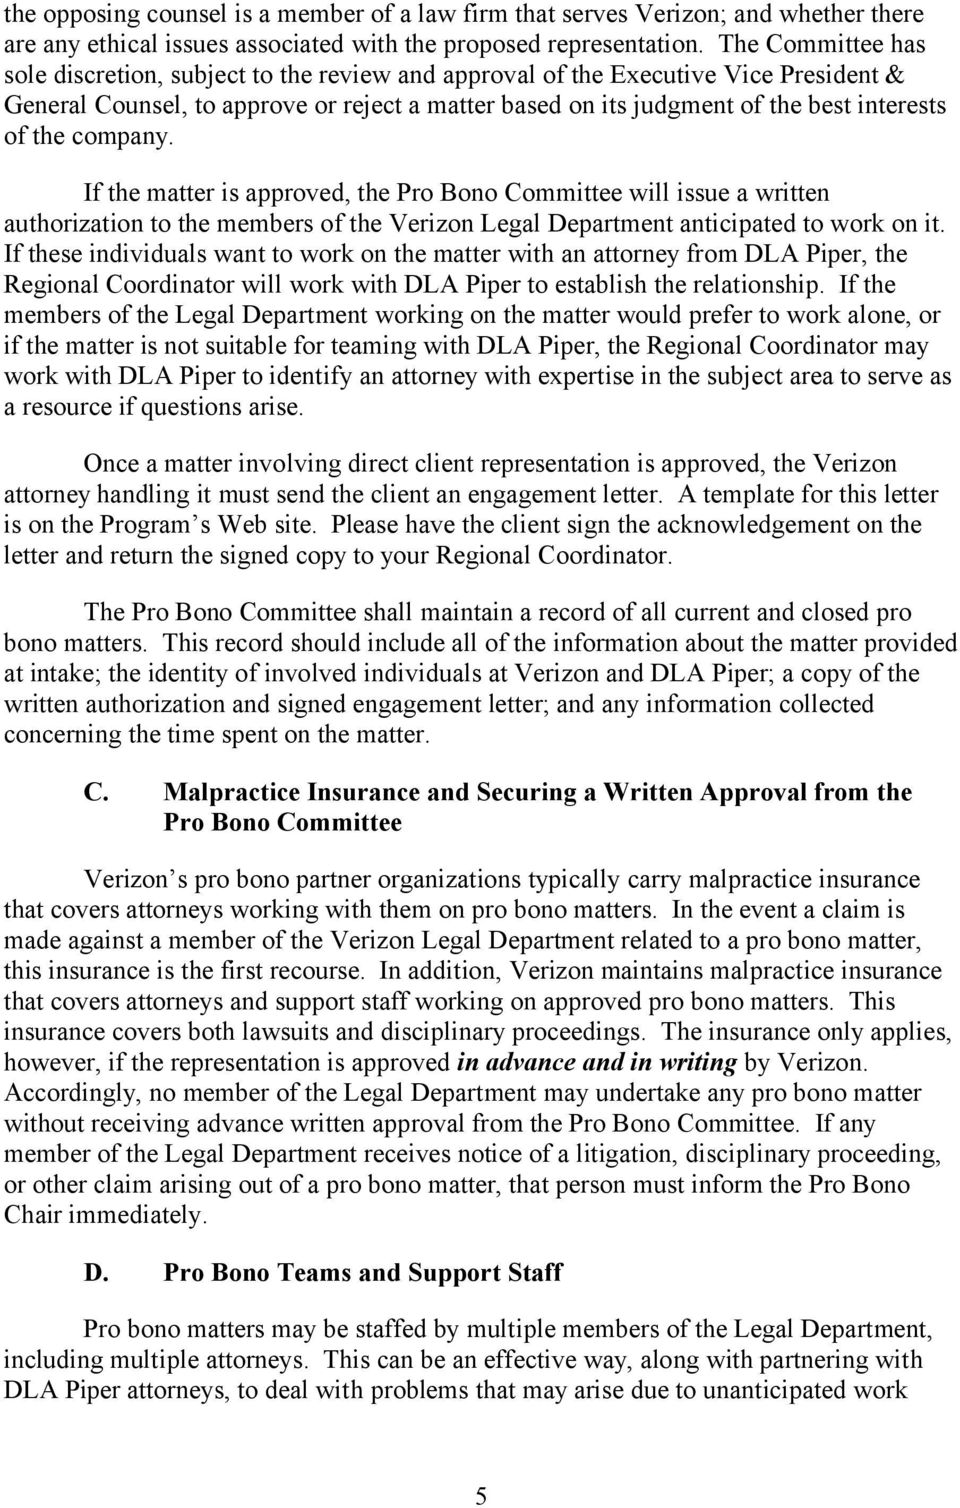 the company. If the matter is approved, the Pro Bono Committee will issue a written authorization to the members of the Verizon Legal Department anticipated to work on it.